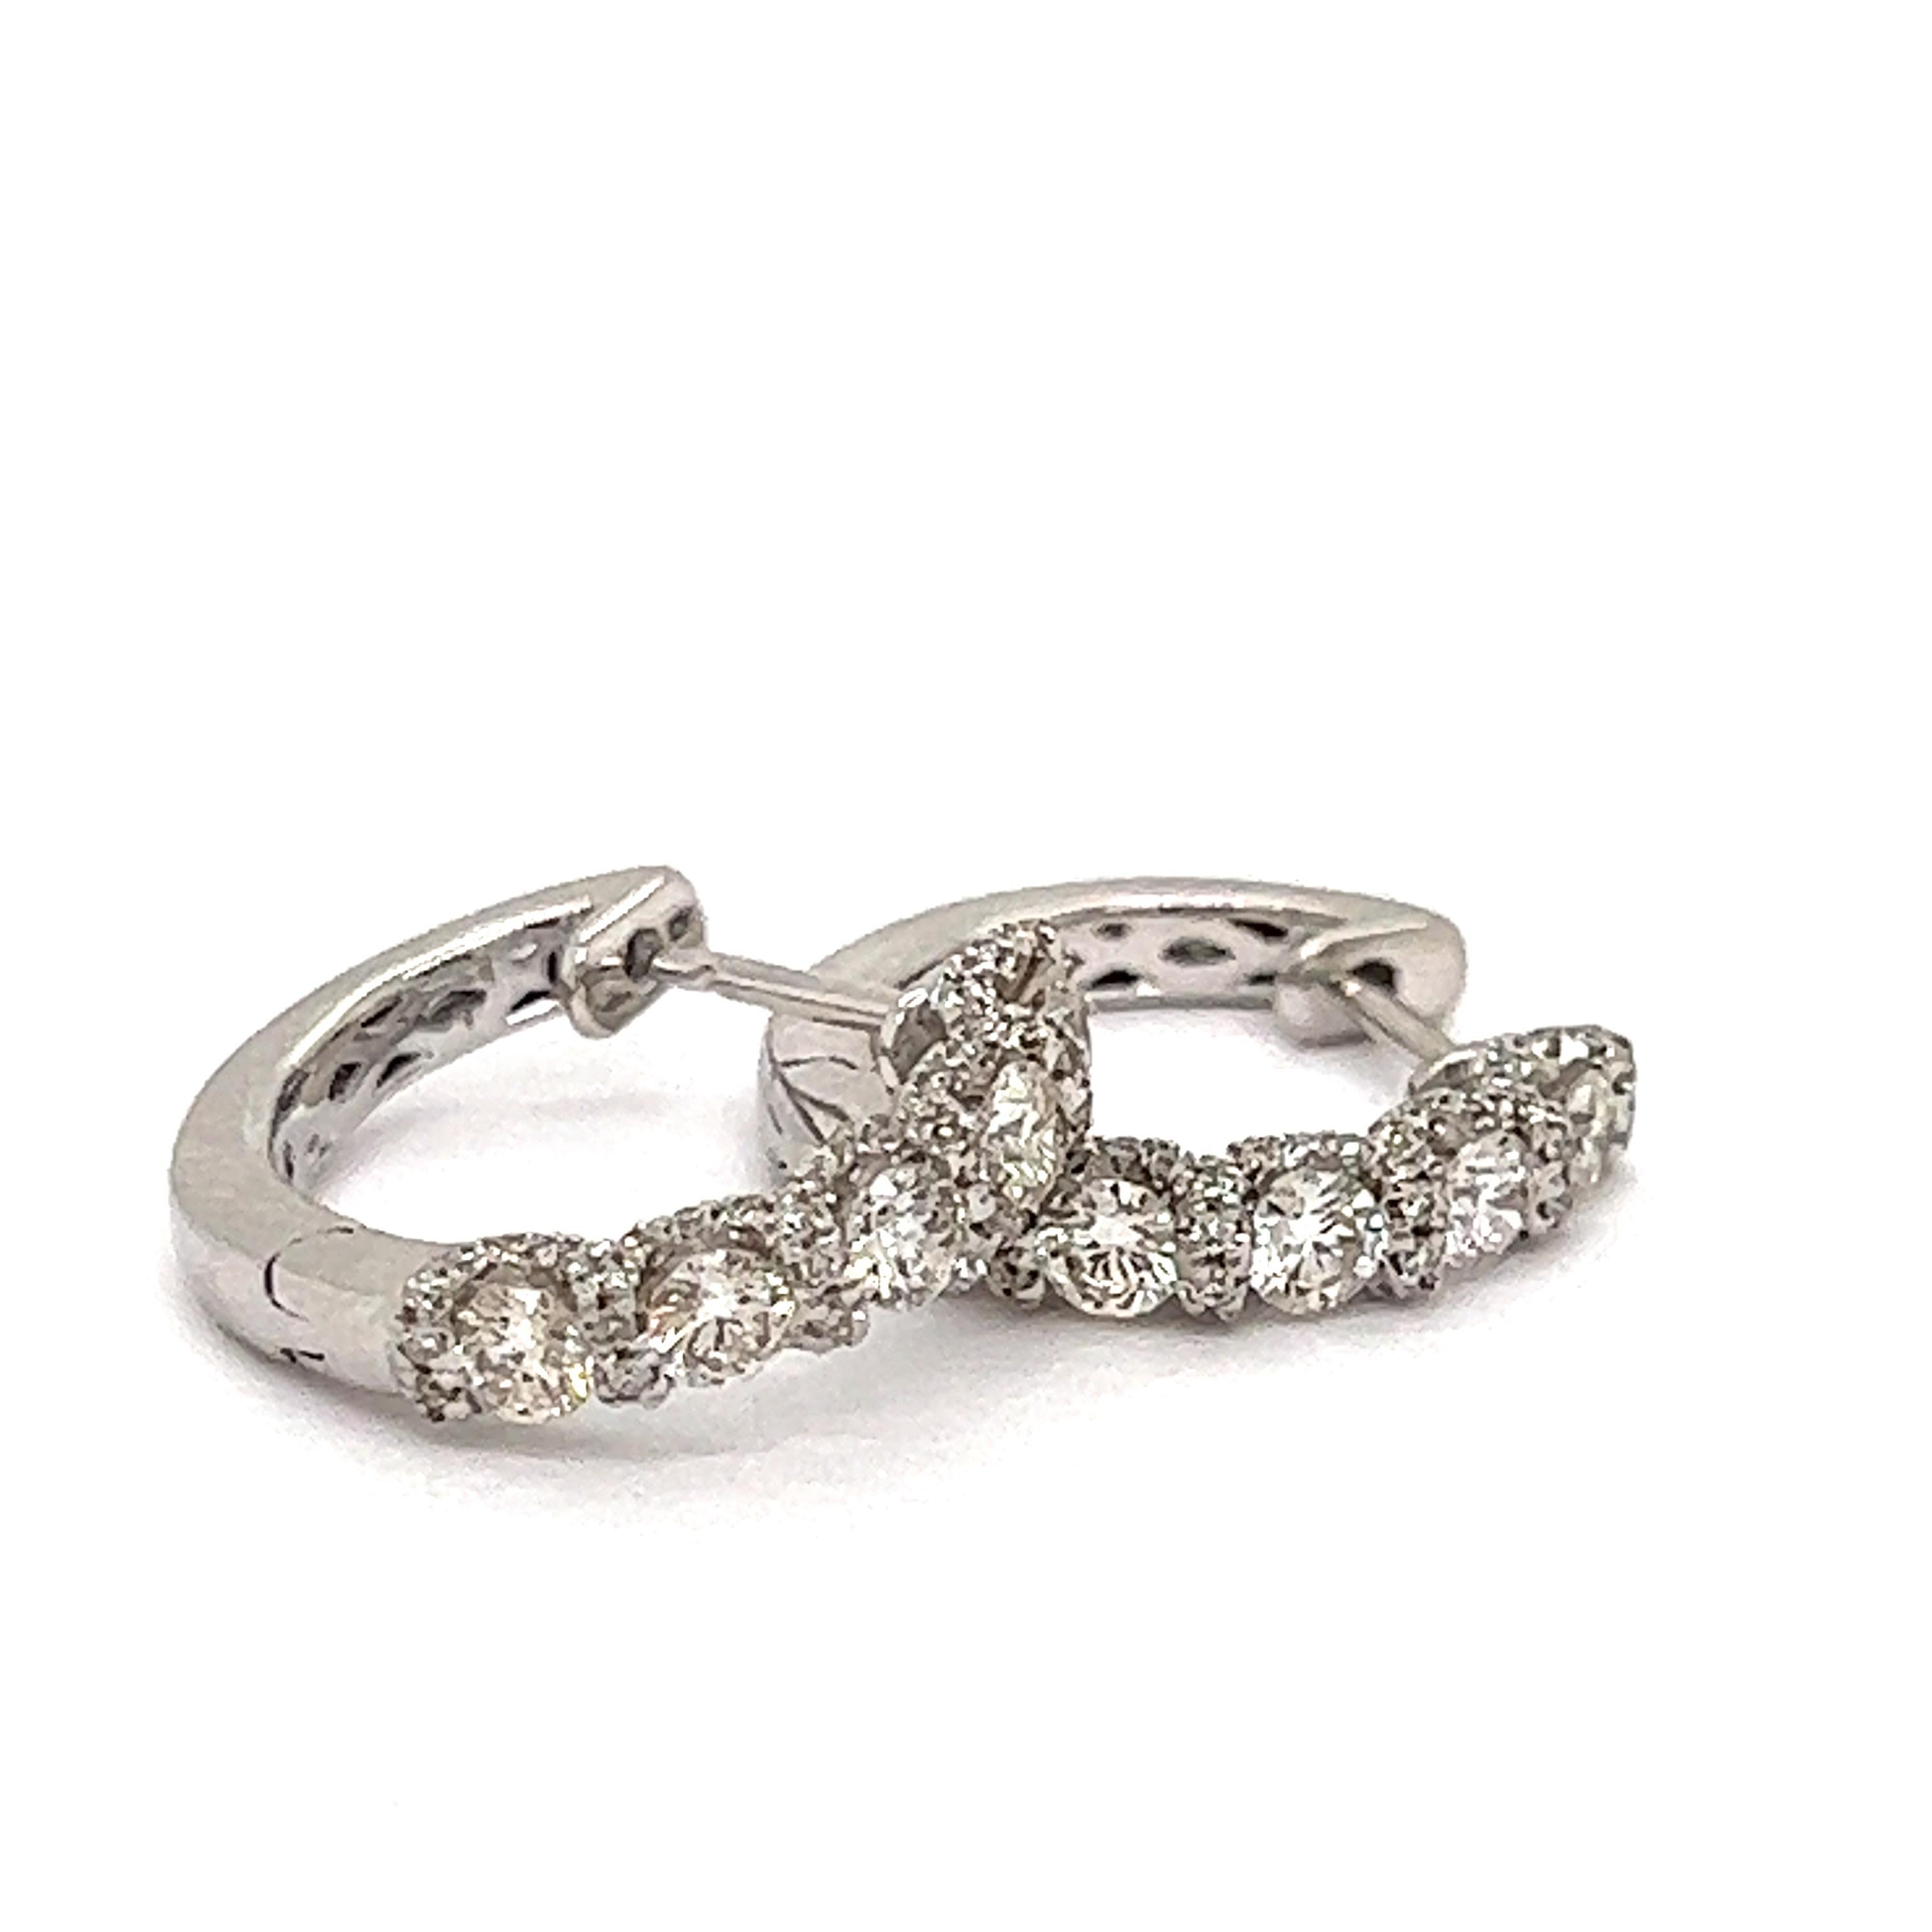 Huggie Diamond Earrings with Pave Diamonds in Shared Prong Mounting 3